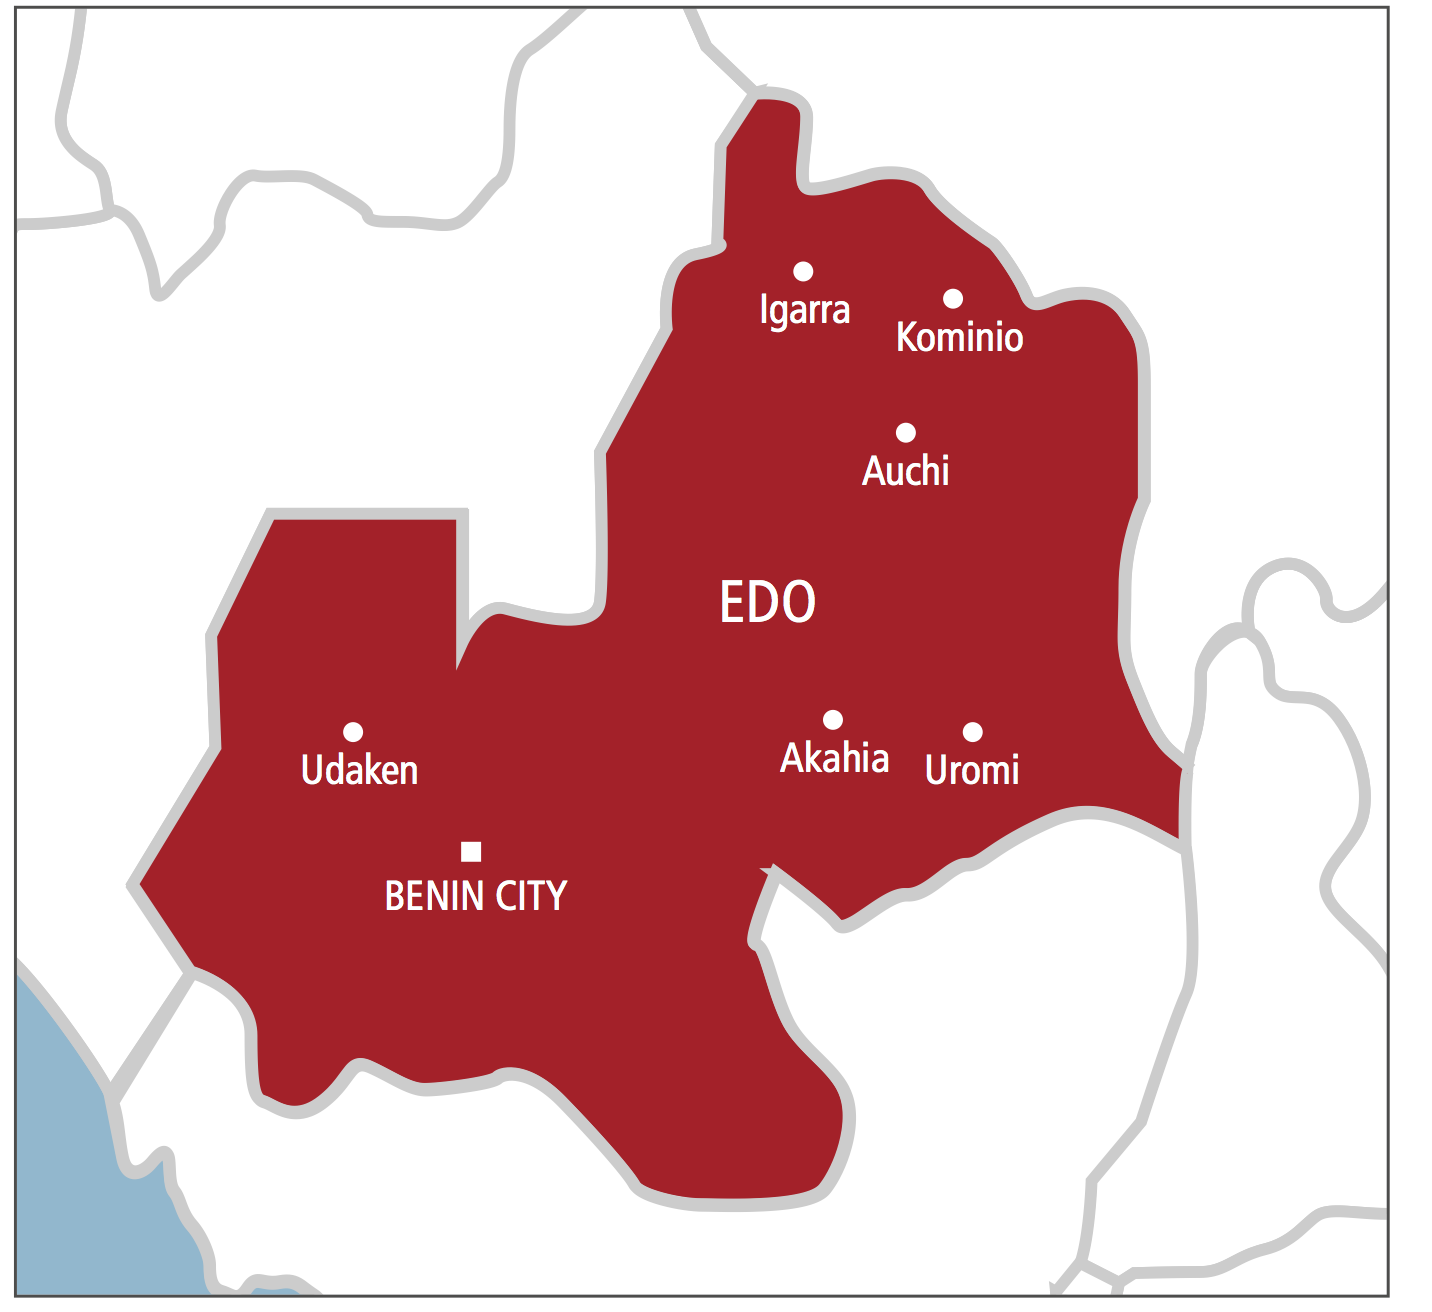 Policemen beaten to death by angry mob in Edo